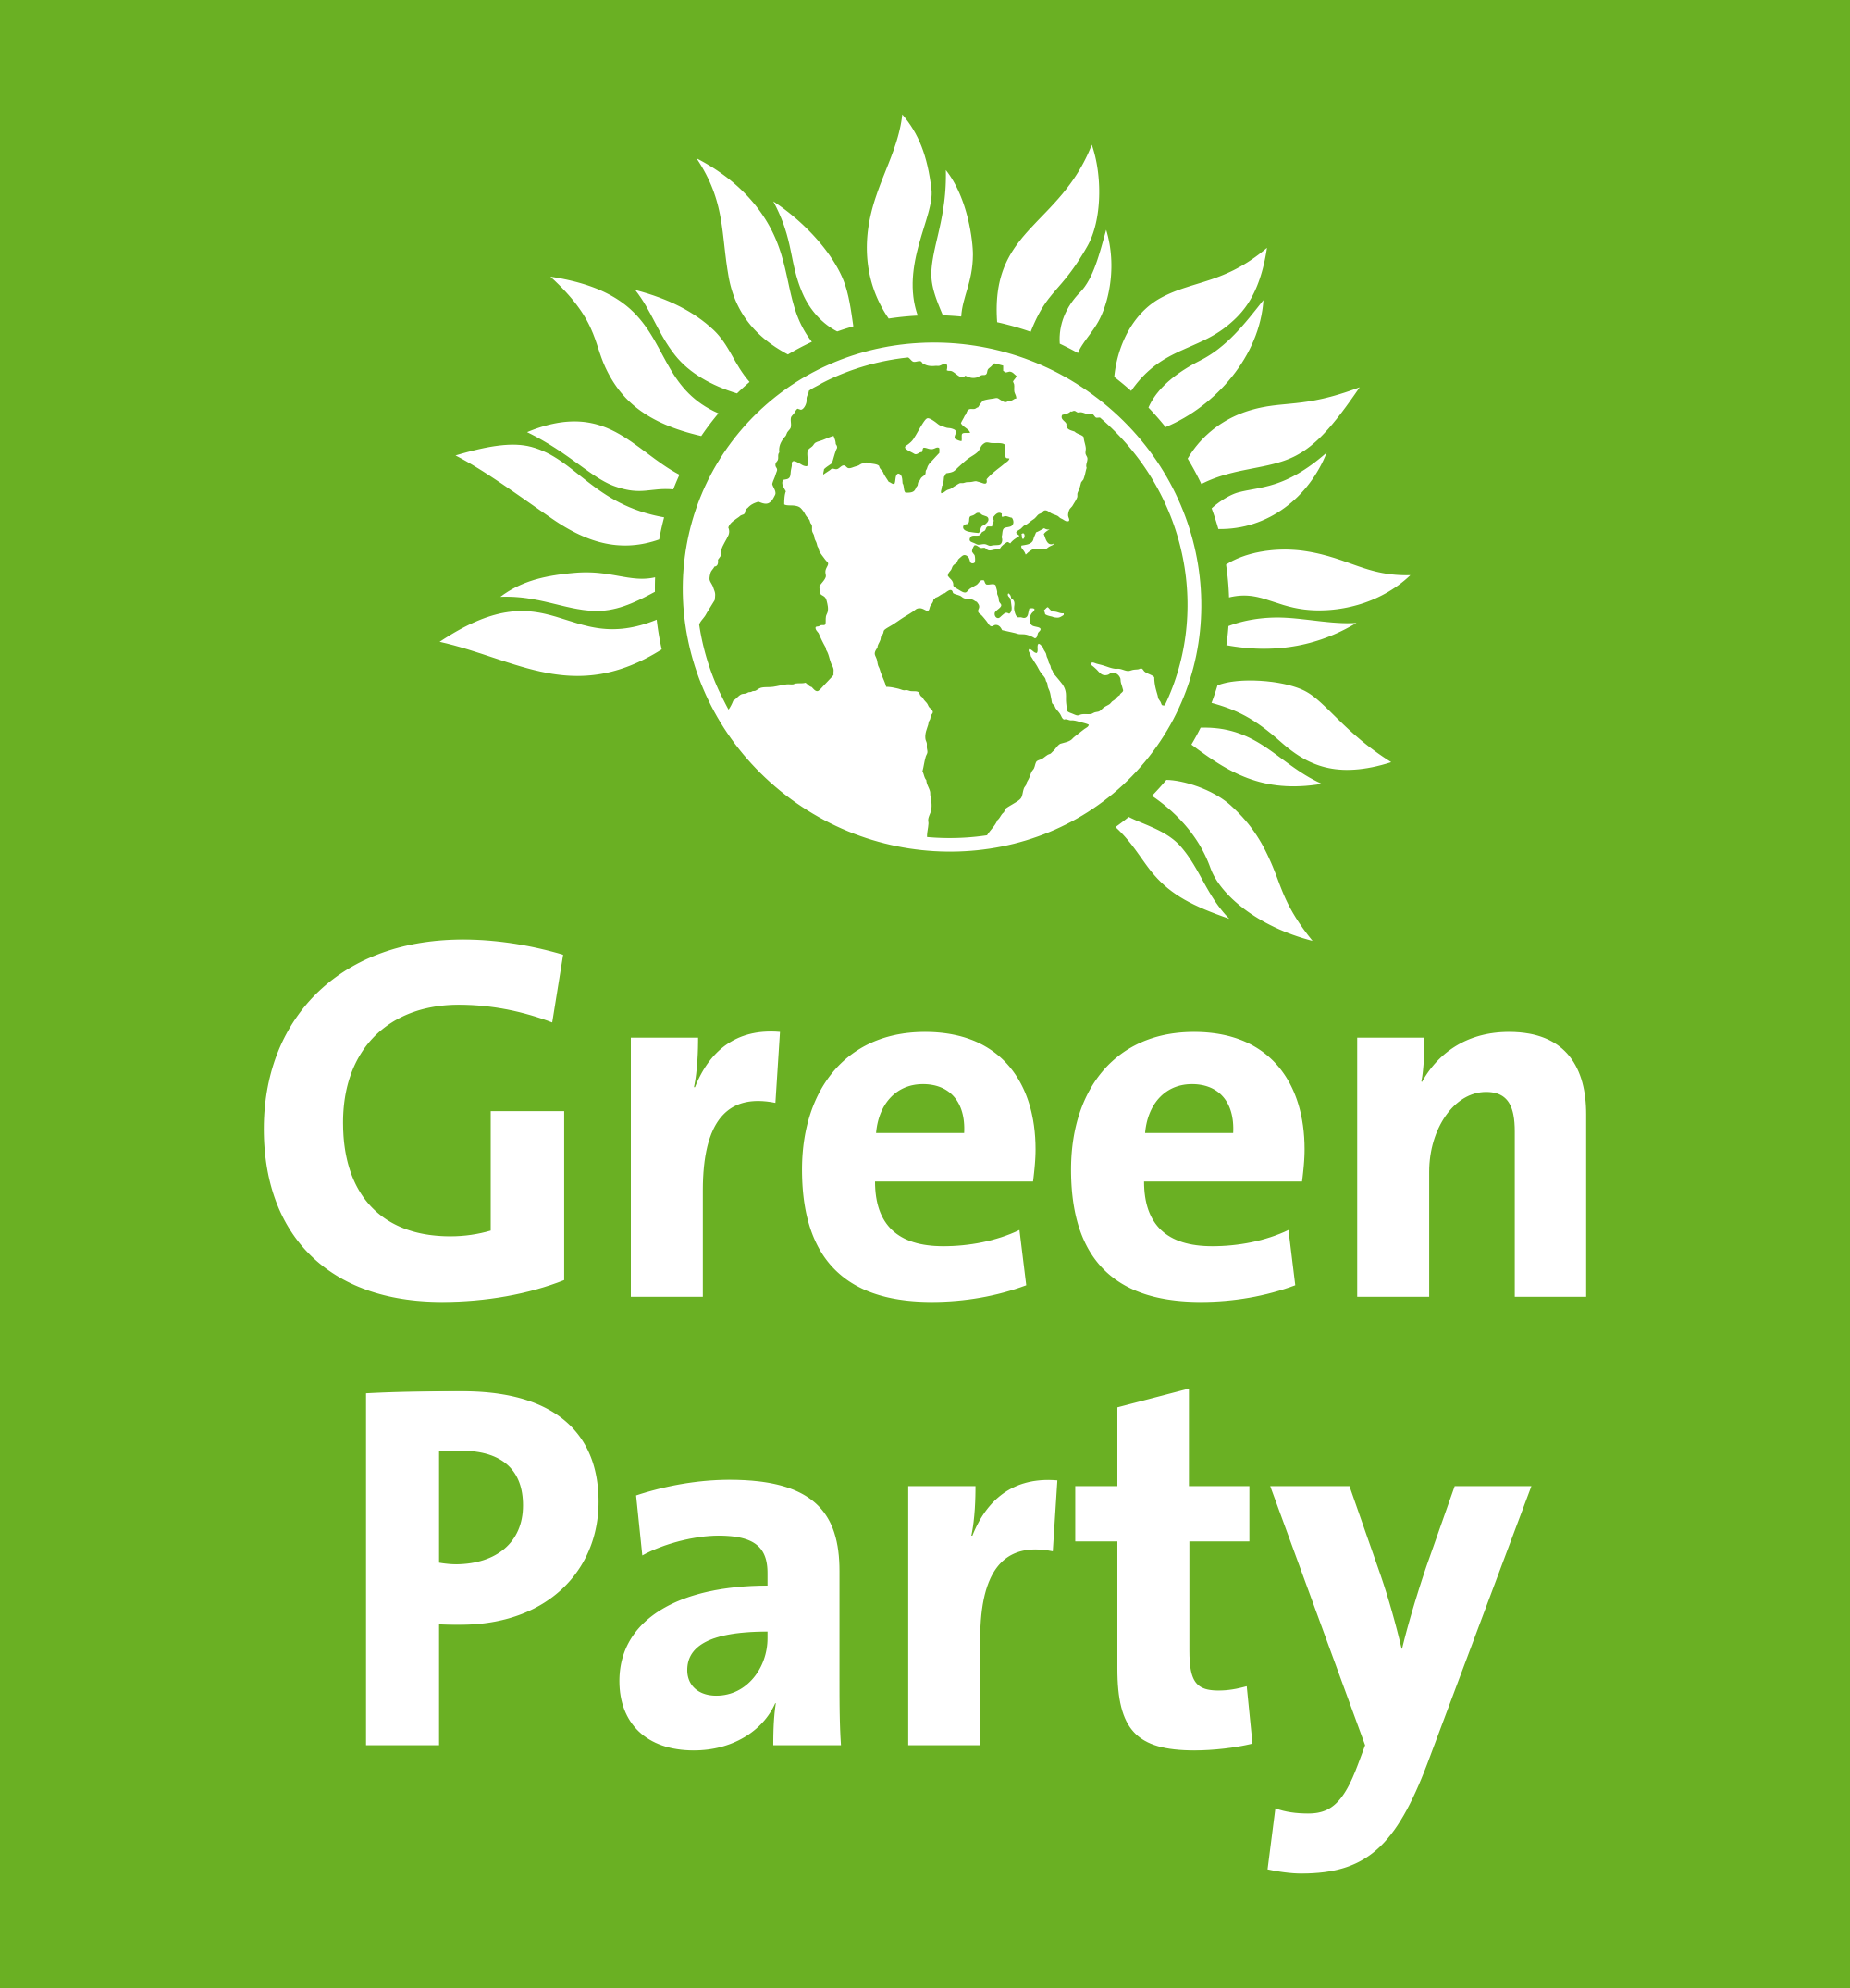 Green party